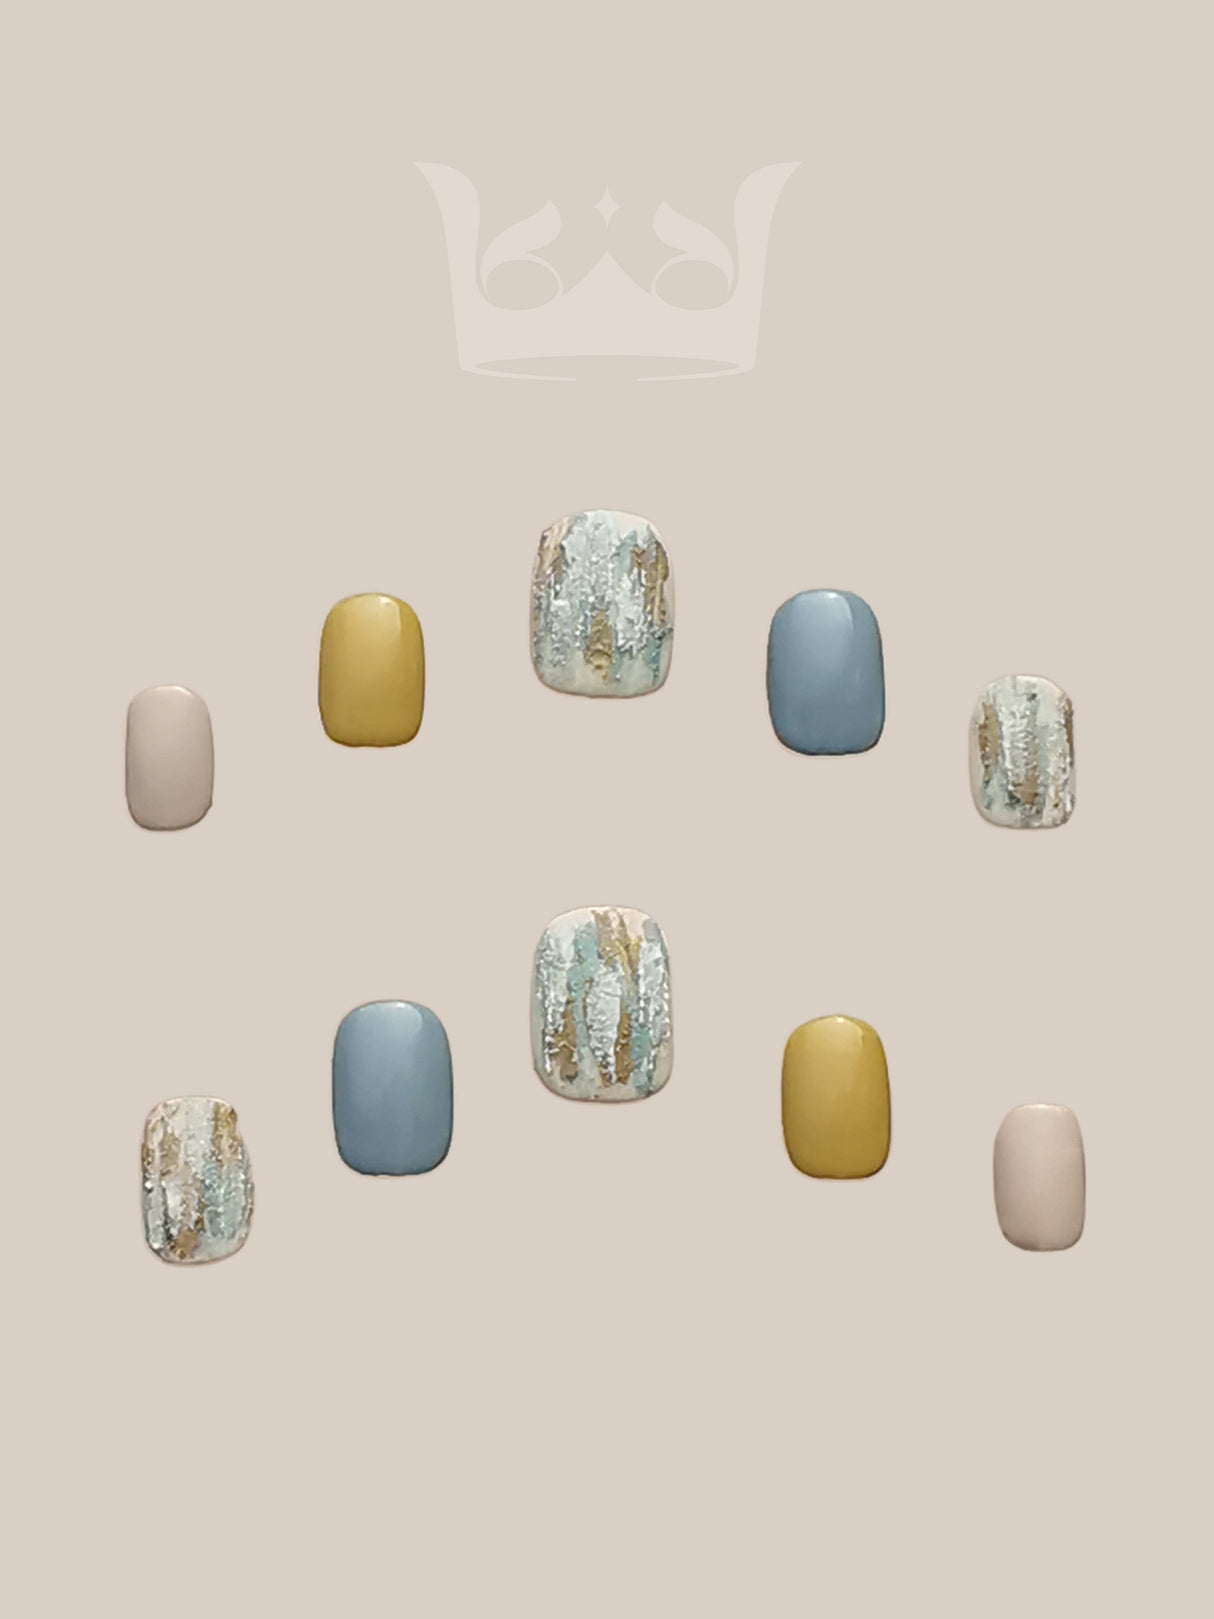 These press-on nails have a minimalist and modern aesthetic with color, texture, pattern, and shape as design elements.